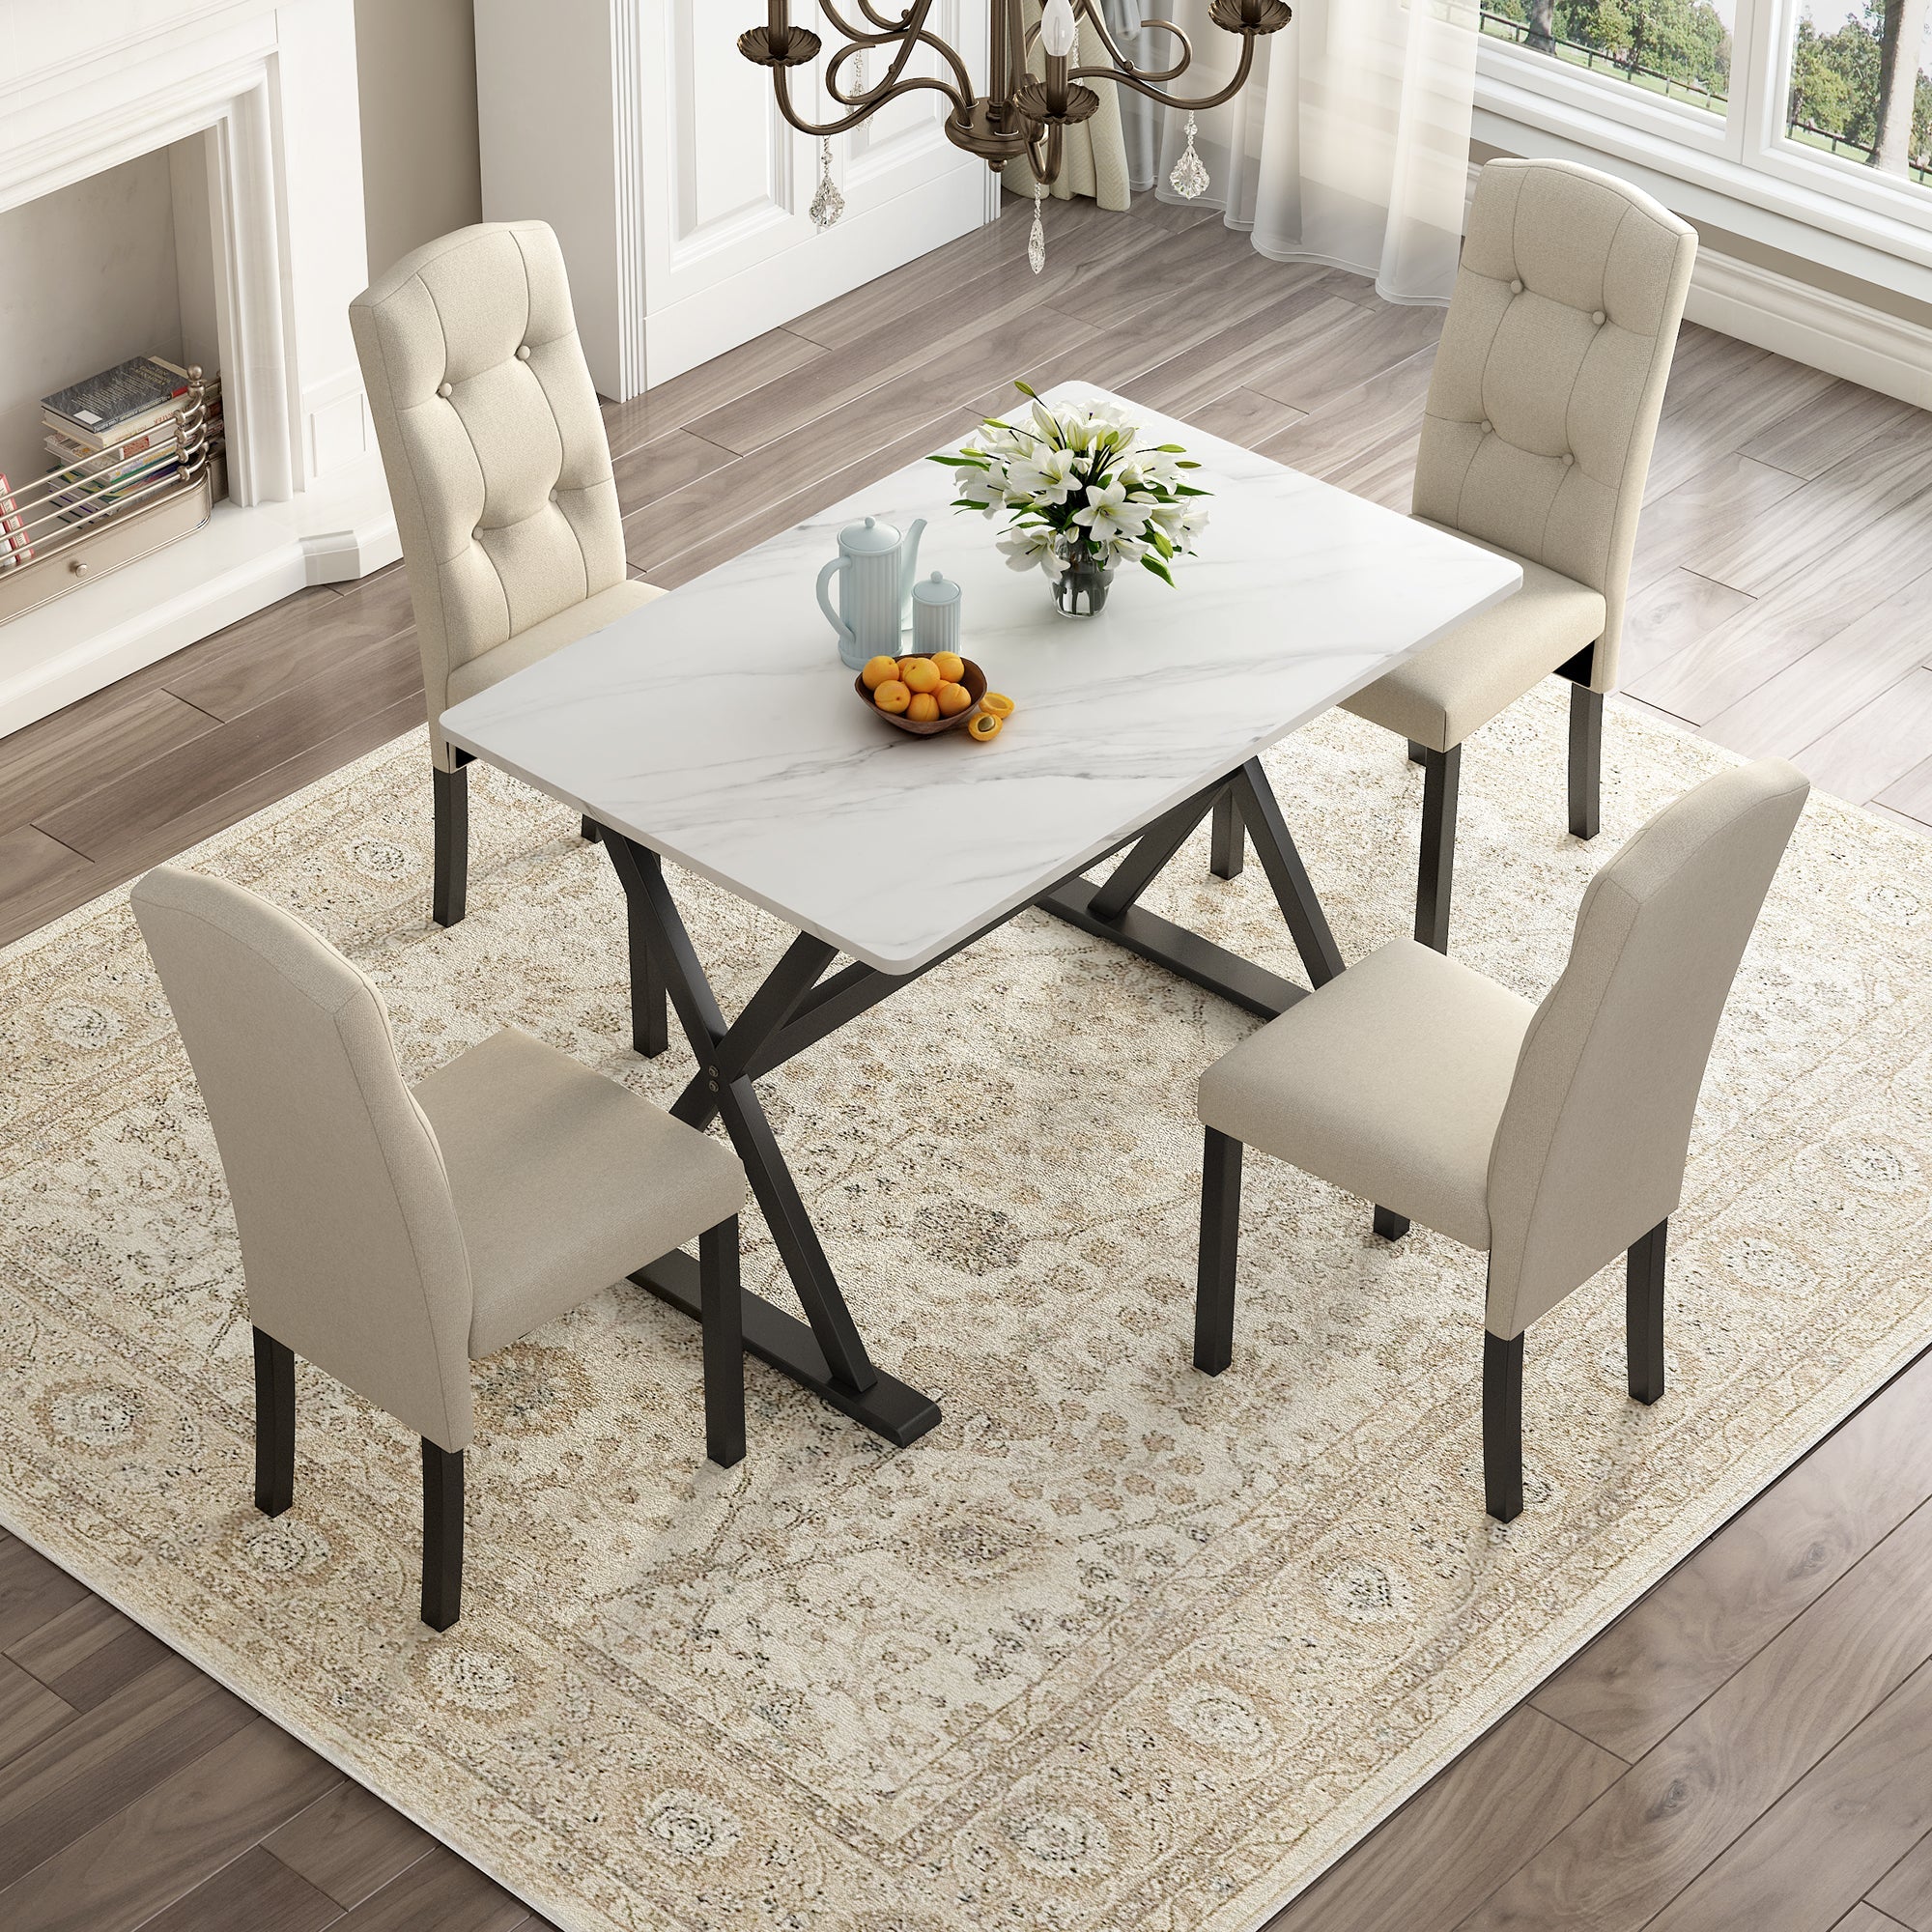 Austin 5 Piece Dining Table Set with Tabletop and 4 Upholstered Chairs - Pier 1